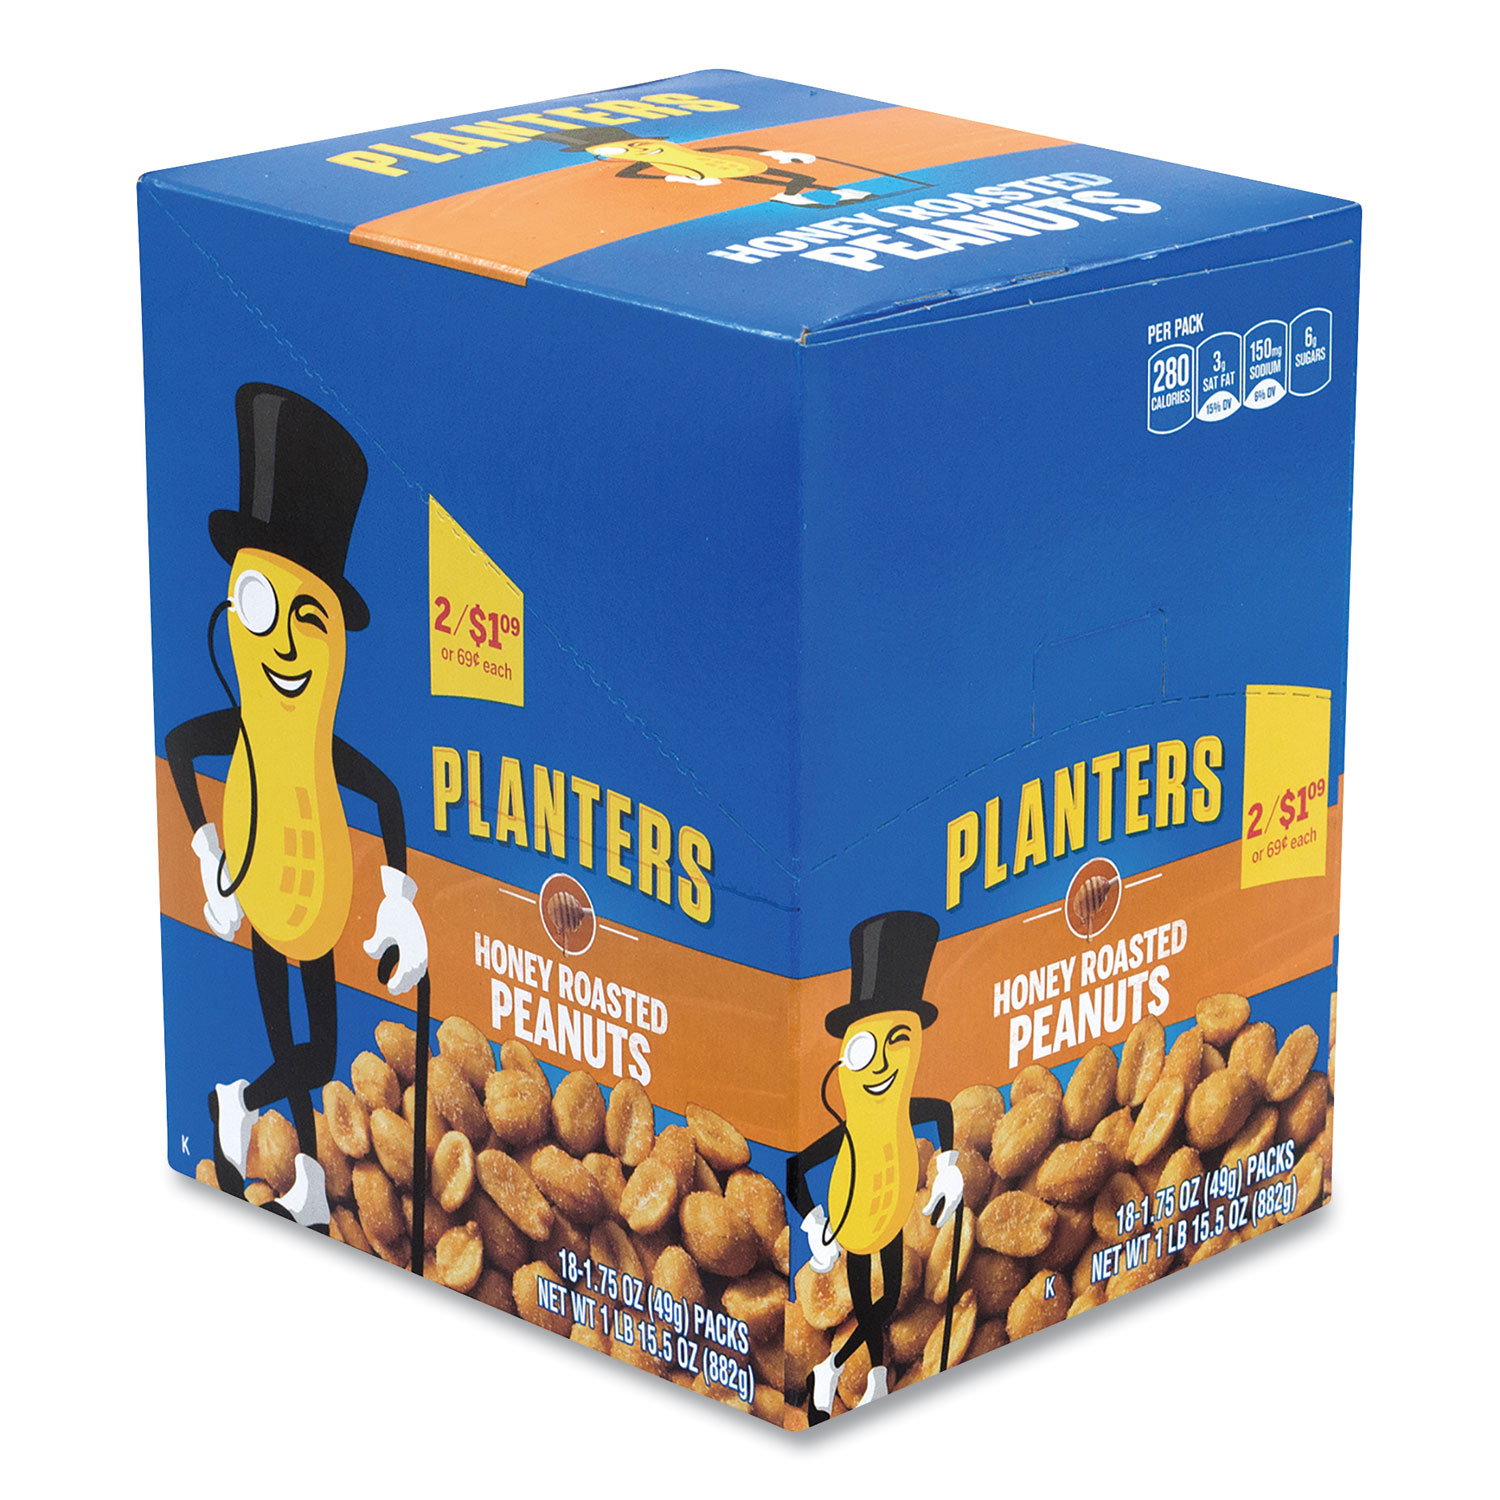  Planters 7566 Honey Roasted Peanuts, 1.75 oz Tube, 18/Box, Free Delivery in 1-4 Business Days (GRR20900625) 